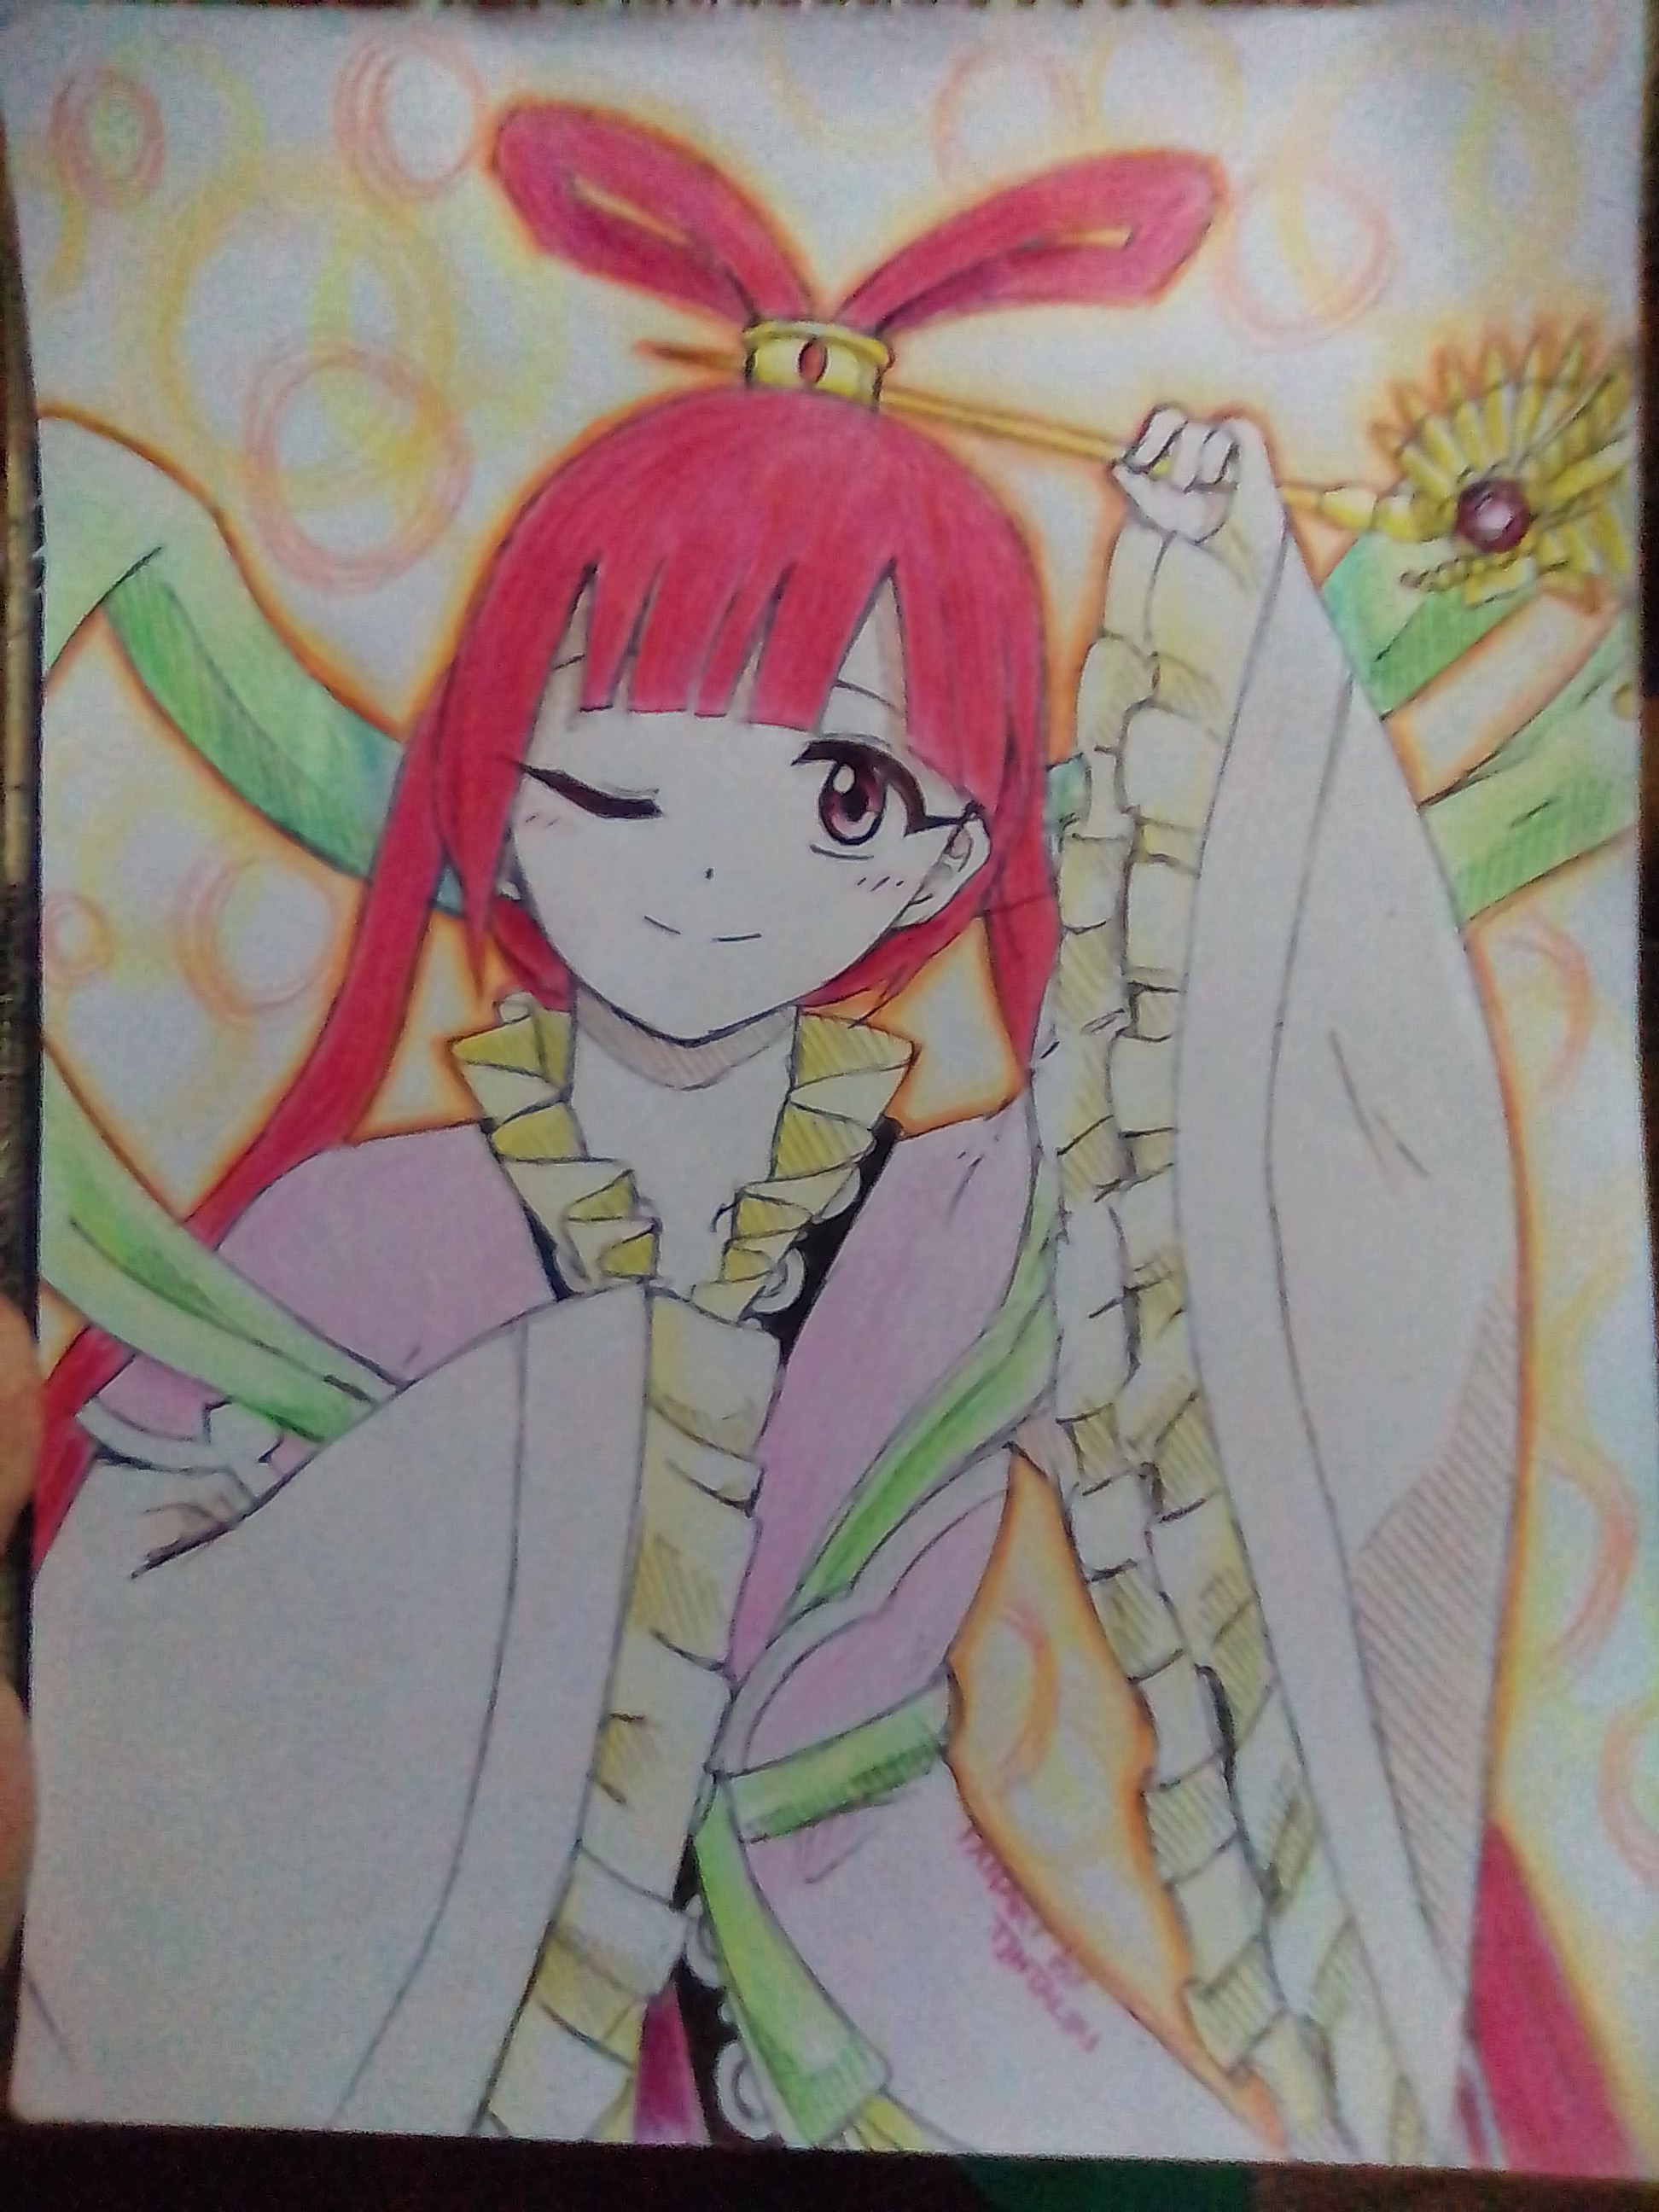 ren kougyoku and vinea (magi the labyrinth of magic) drawn by